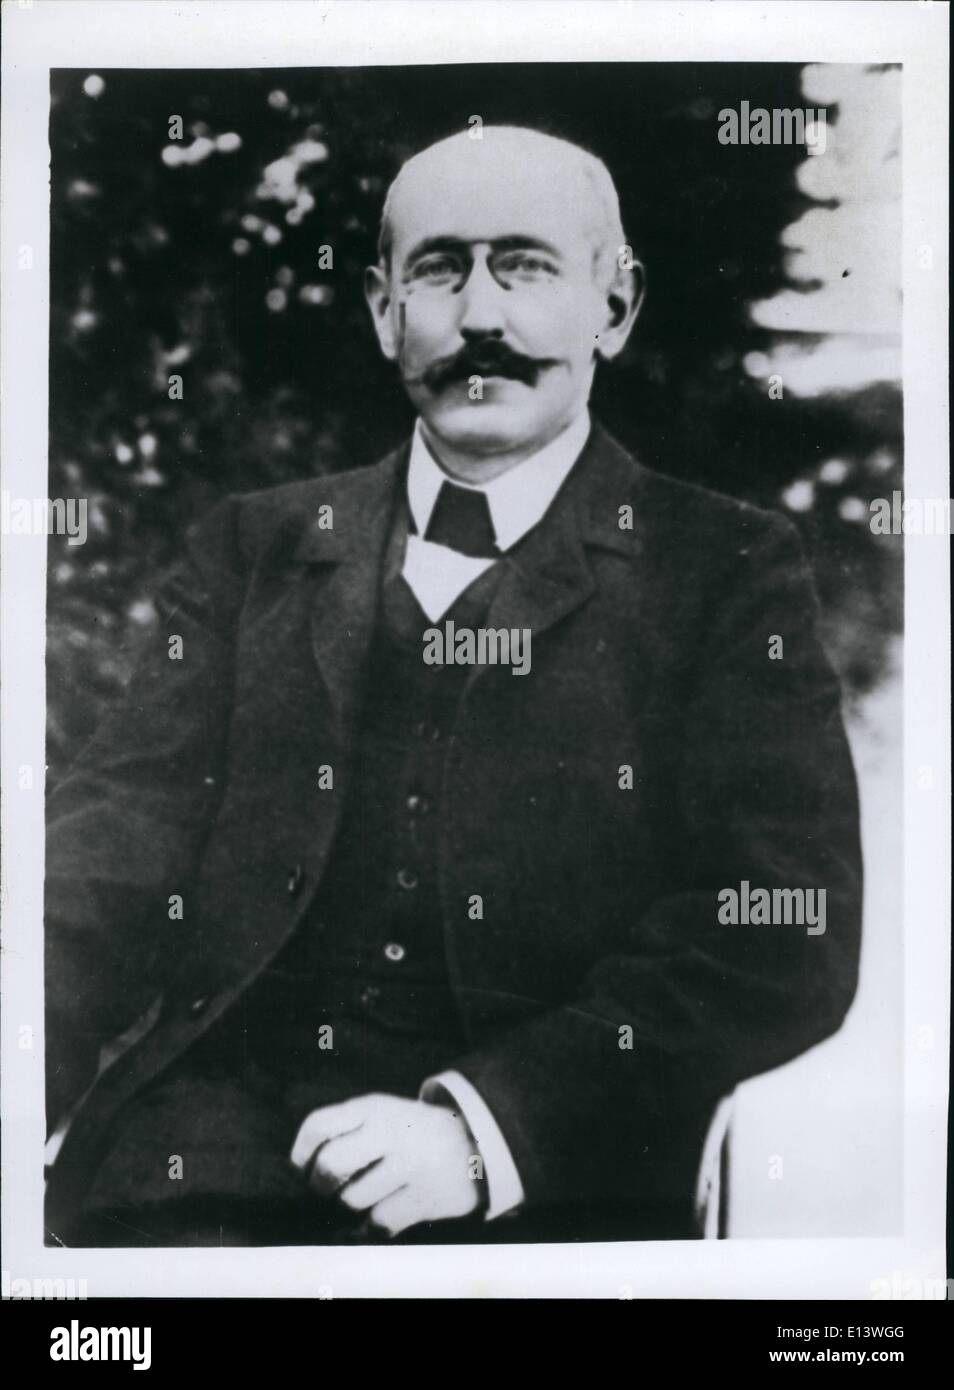 Mar. 27, 2012 - Col. Alfred Dreyfus. Dreyfus appeals for sacco stay.: Sees execution ''Monal Disaster'': Col Alfred Dreyfus, who by reason of his own suffering long ago is perhaps better able than any other man in the world to appreciate the horror of the last seven years for the two Italians awaiting death. Dreyfus universal symbol of persecuted innocence. the historic victim of miscarriage of justice that stirred the conscience of the civilized world, is now aged and feeble Stock Photo